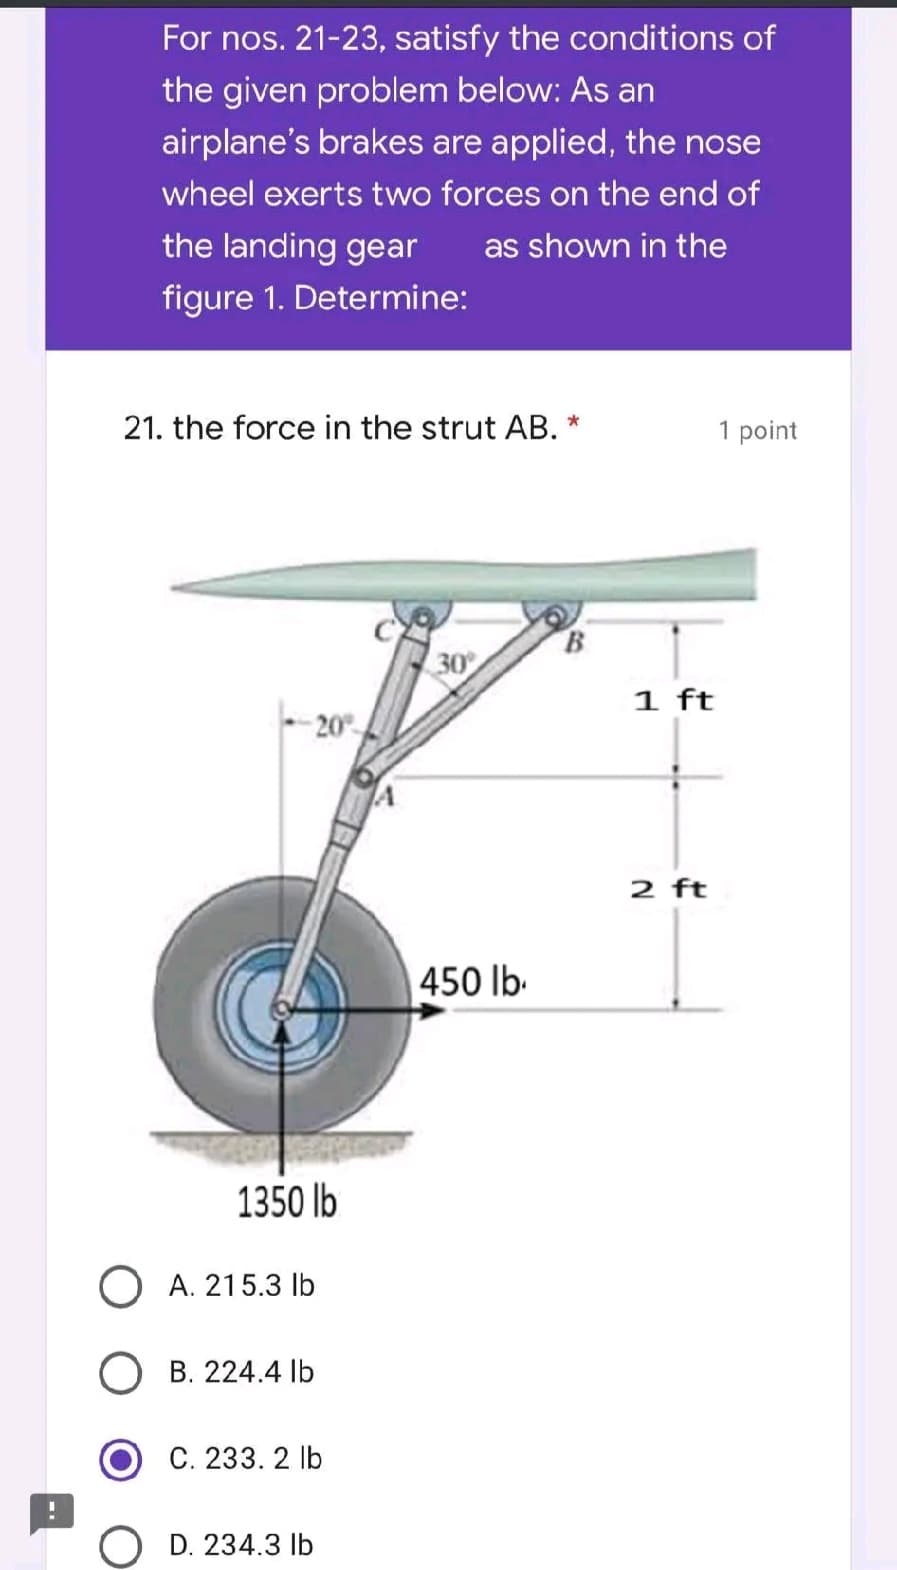 For nos. 21-23, satisfy the conditions of
the given problem below: As an
airplane's brakes are applied, the nose
wheel exerts two forces on the end of
the landing gear as shown in the
figure 1. Determine:
21. the force in the strut AB. *
1 point
30°
450 lb.
1350 lb
O A. 215.3 lb
B. 224.4 lb
C. 233. 2 lb
D. 234.3 lb
1 ft
2 ft